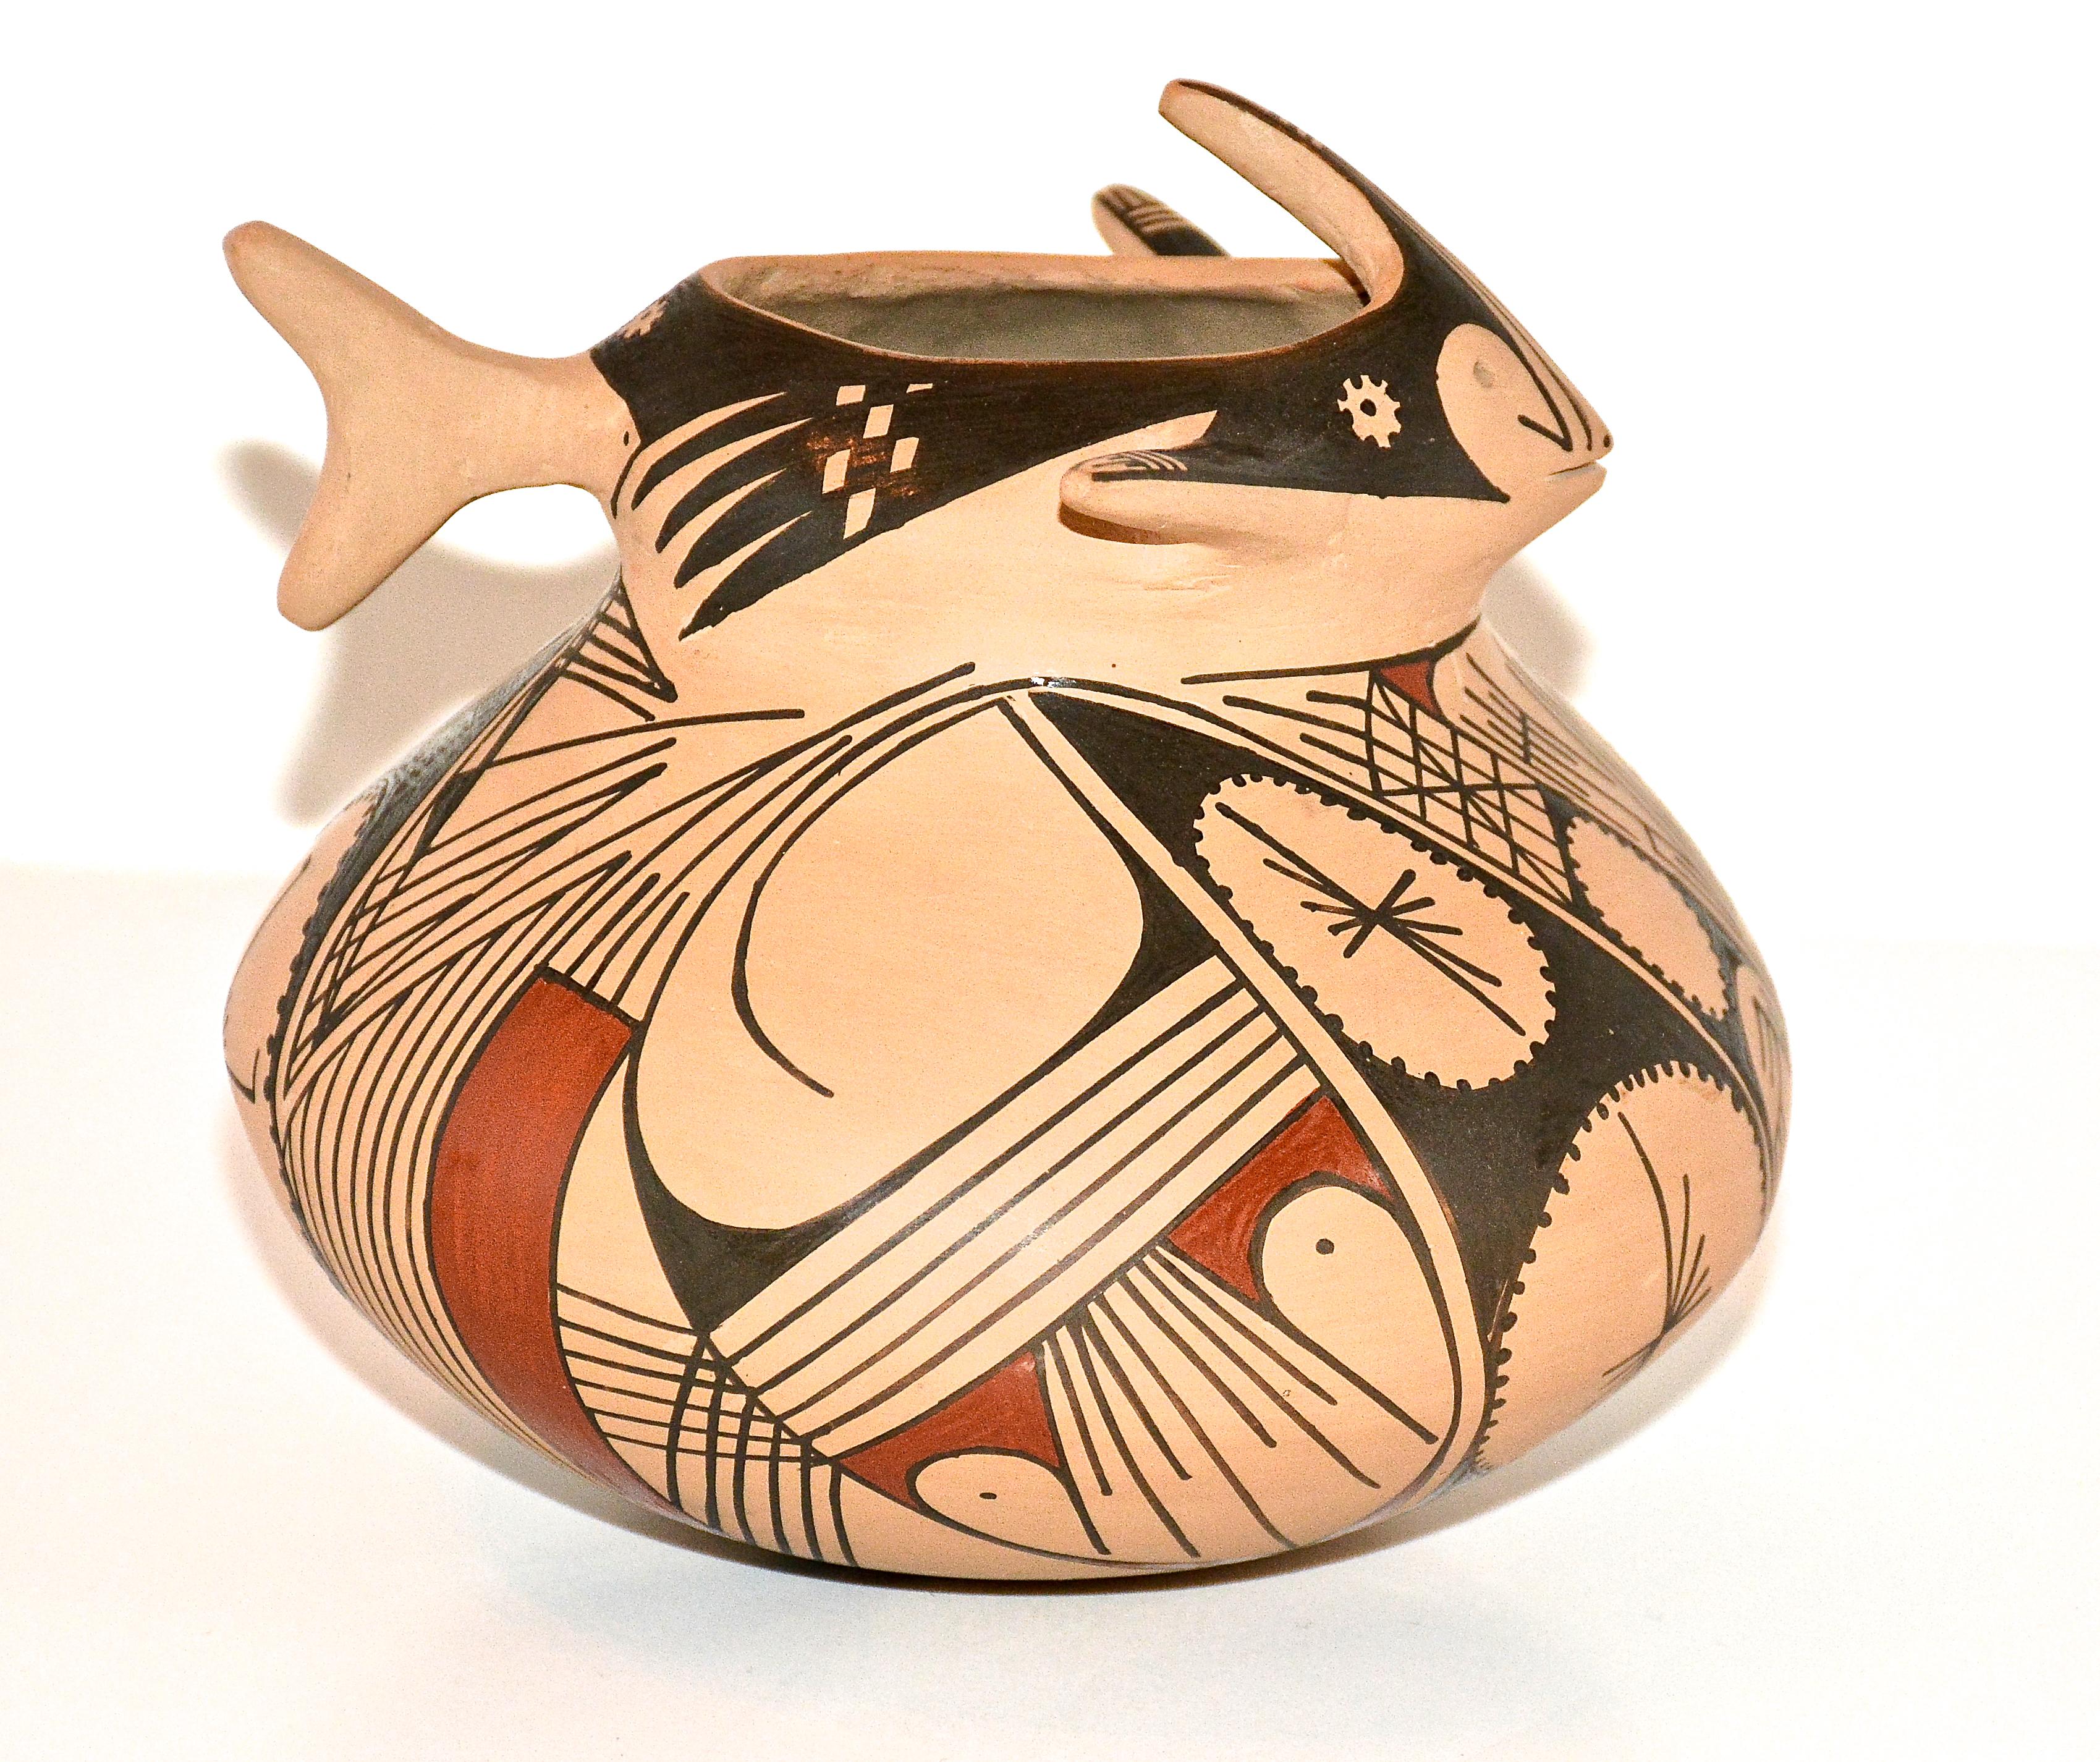 Polychrome effigy pot
Mauro Quezada
Hand coiled low fired clay
1989
Pueblo Quezada, Mata Ortiz, Chihuahua, Mexico
Measures: 4.75 inches height x 5.5 inches in diameter

Mauro Quezada is the nephew of Juan Quezada and an acknowledged Master Potter of